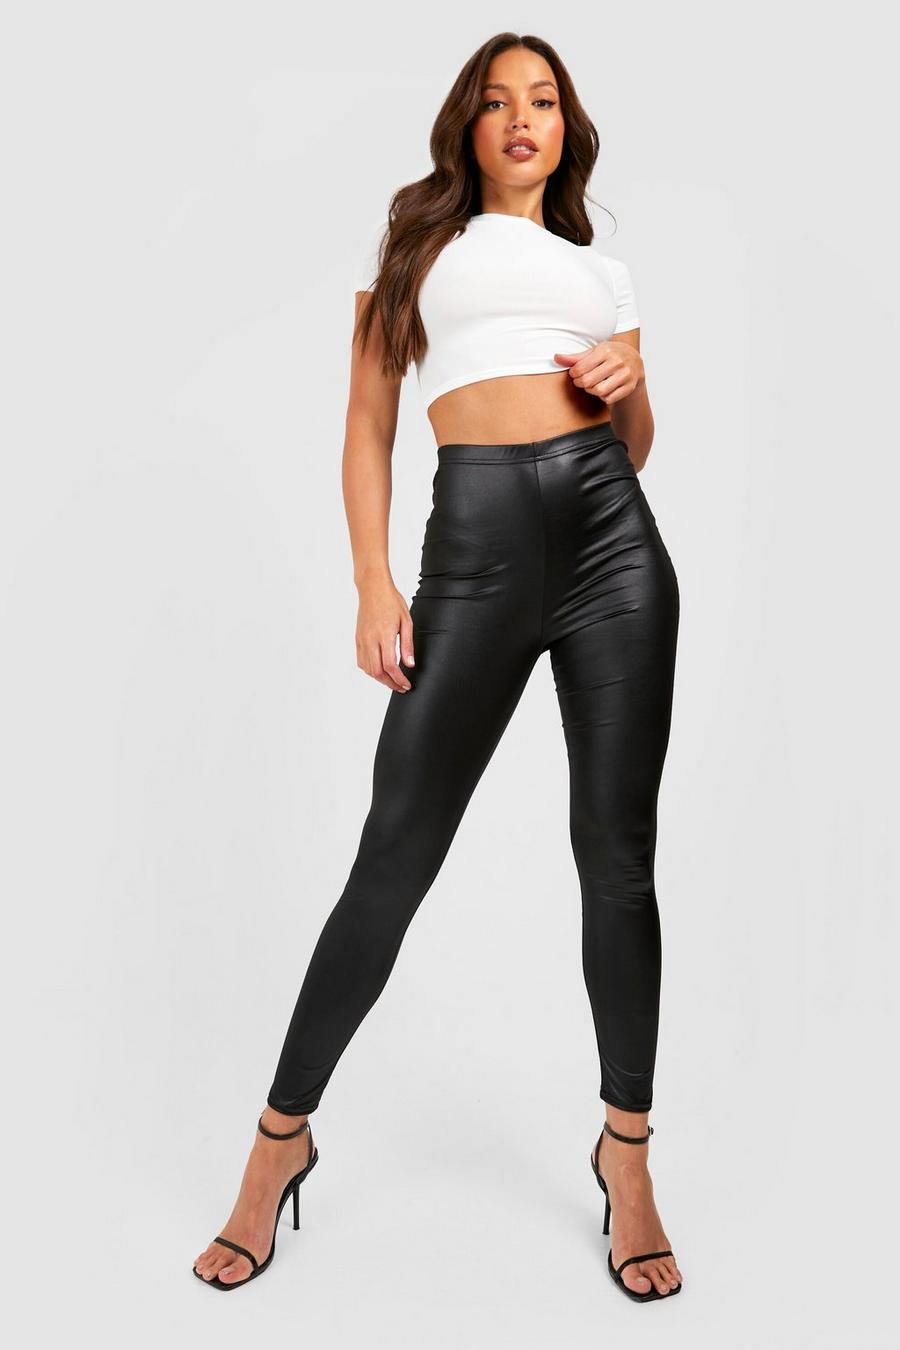 Black Tall Faux Leather High Waisted Leggings